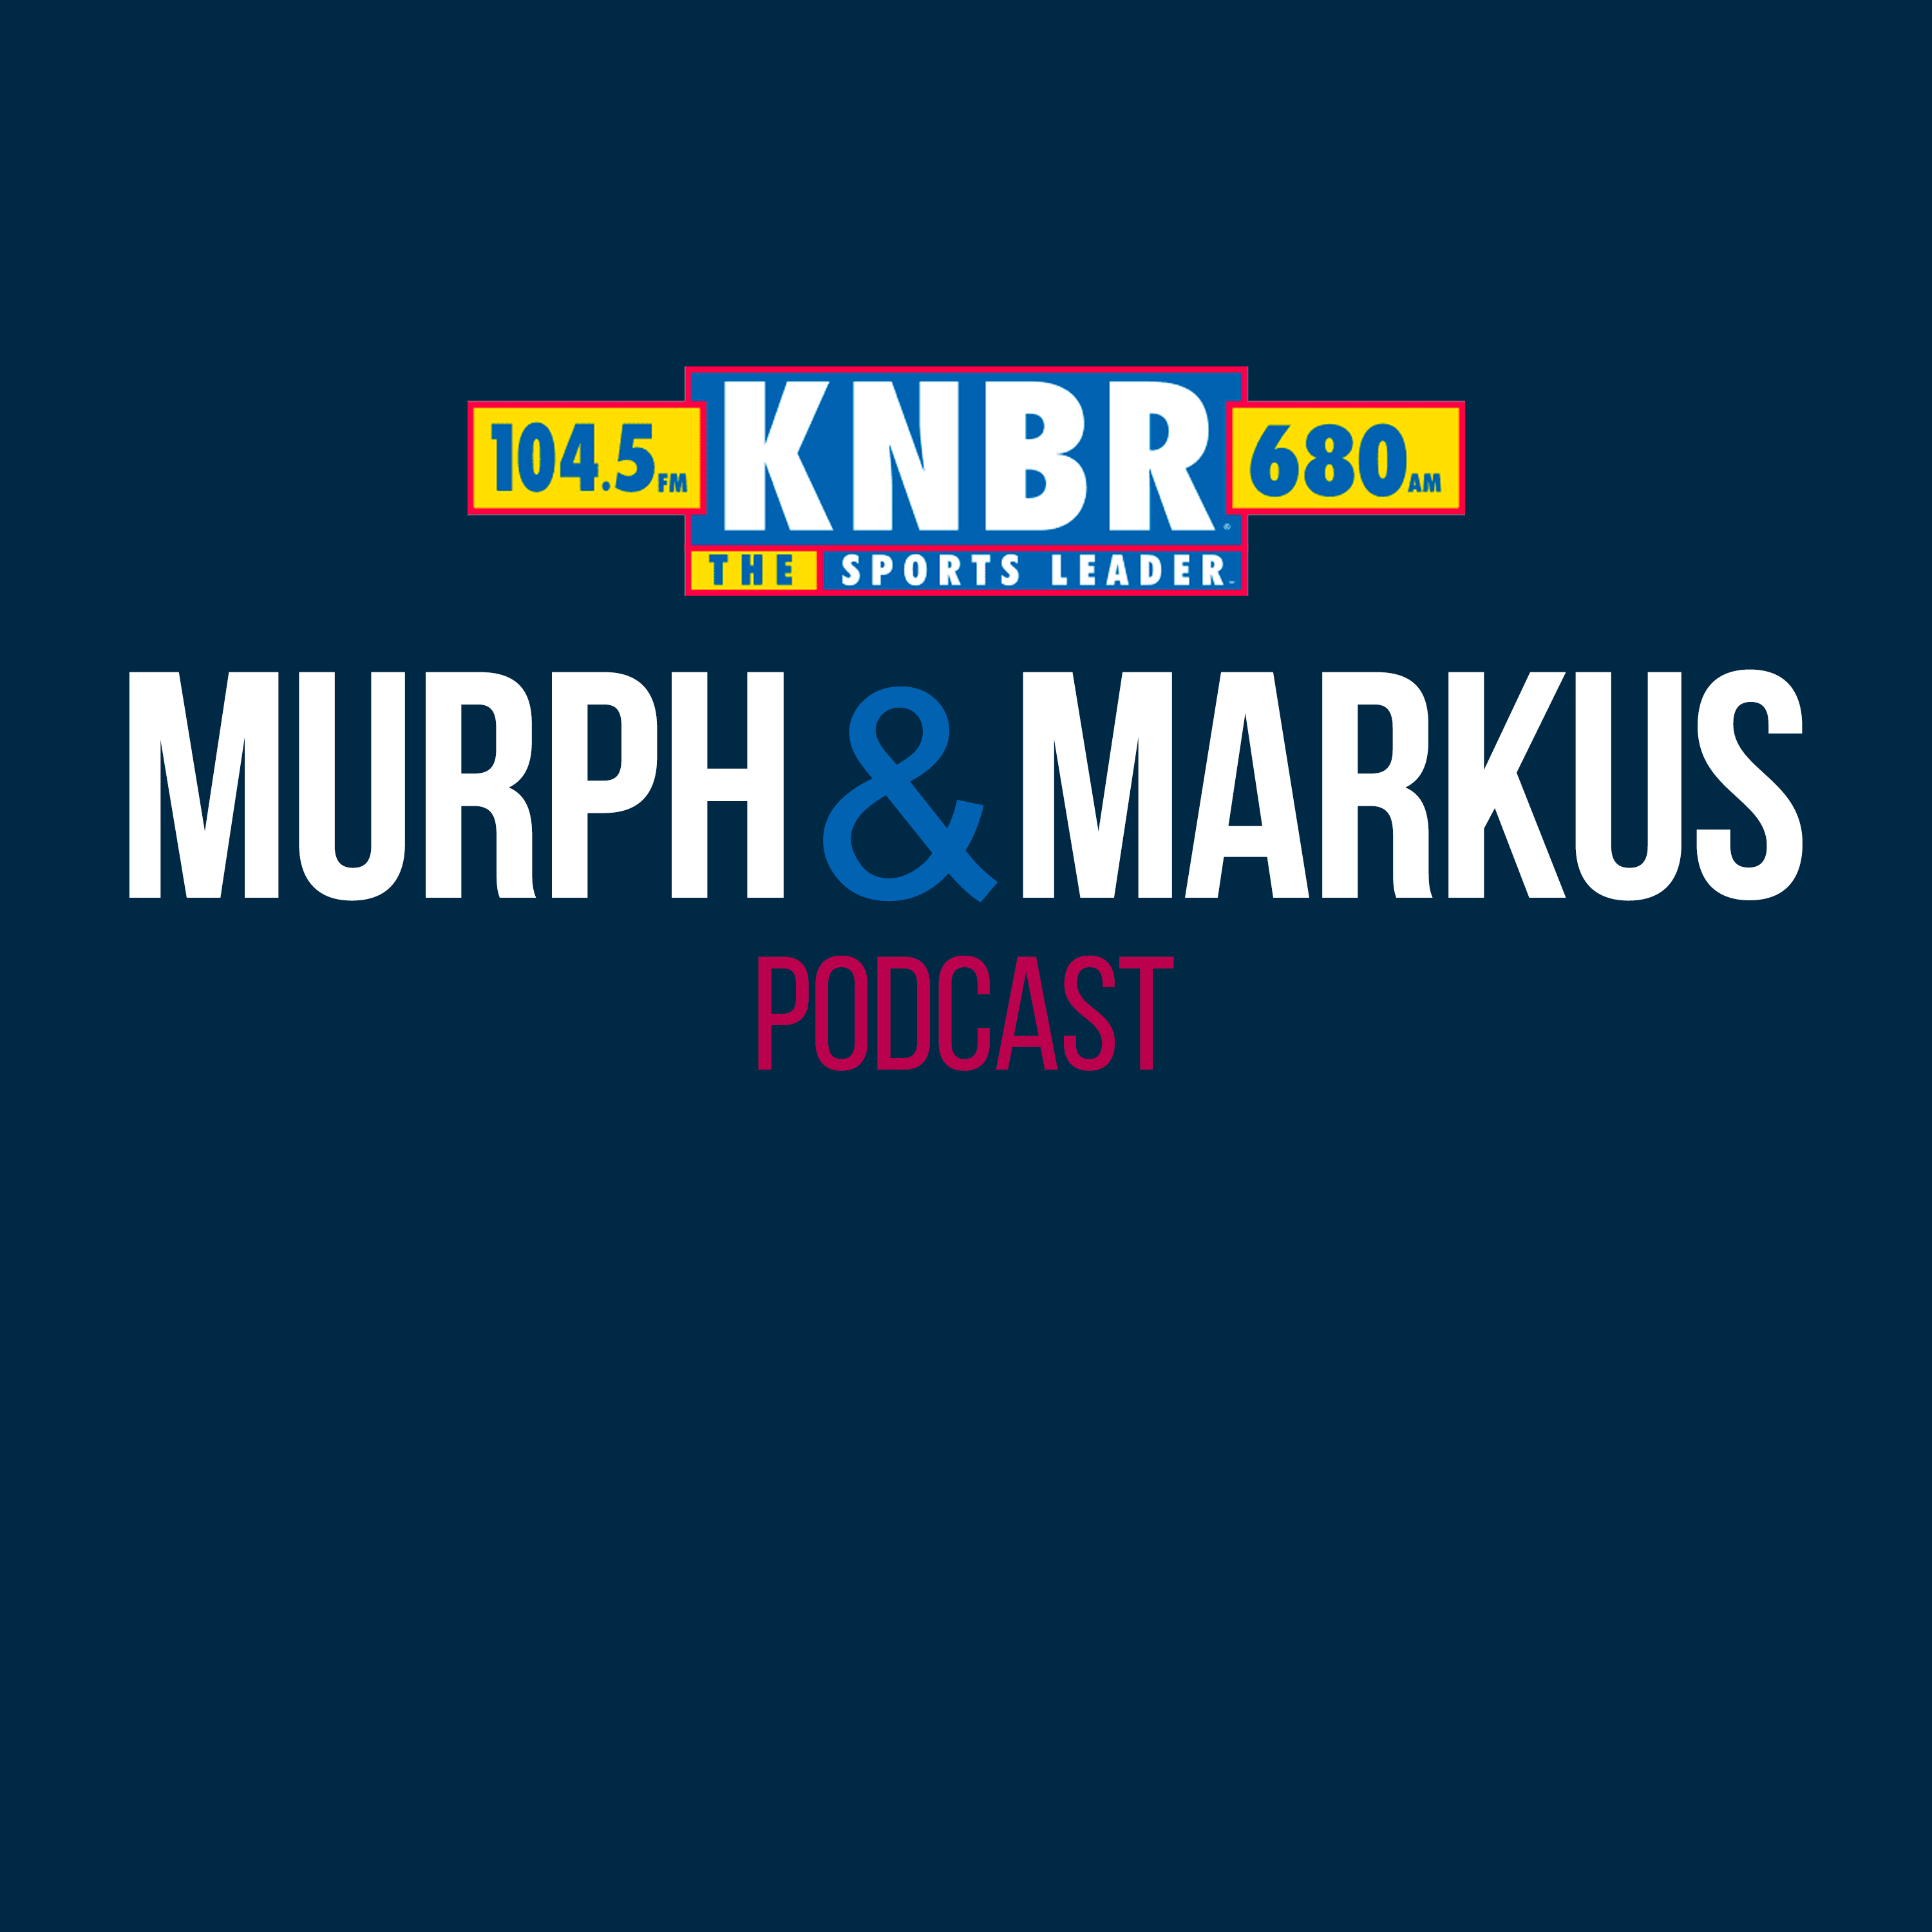 5-7 Hour 1: Murph & Markus react to the Giants getting swept in Philly, recap all the highlights from the Bay Area Sports Hal of Fame ceremony last night, and discuss what could've been if the Warriors traded for the 1st overall pick in the 2020 NBA Draft